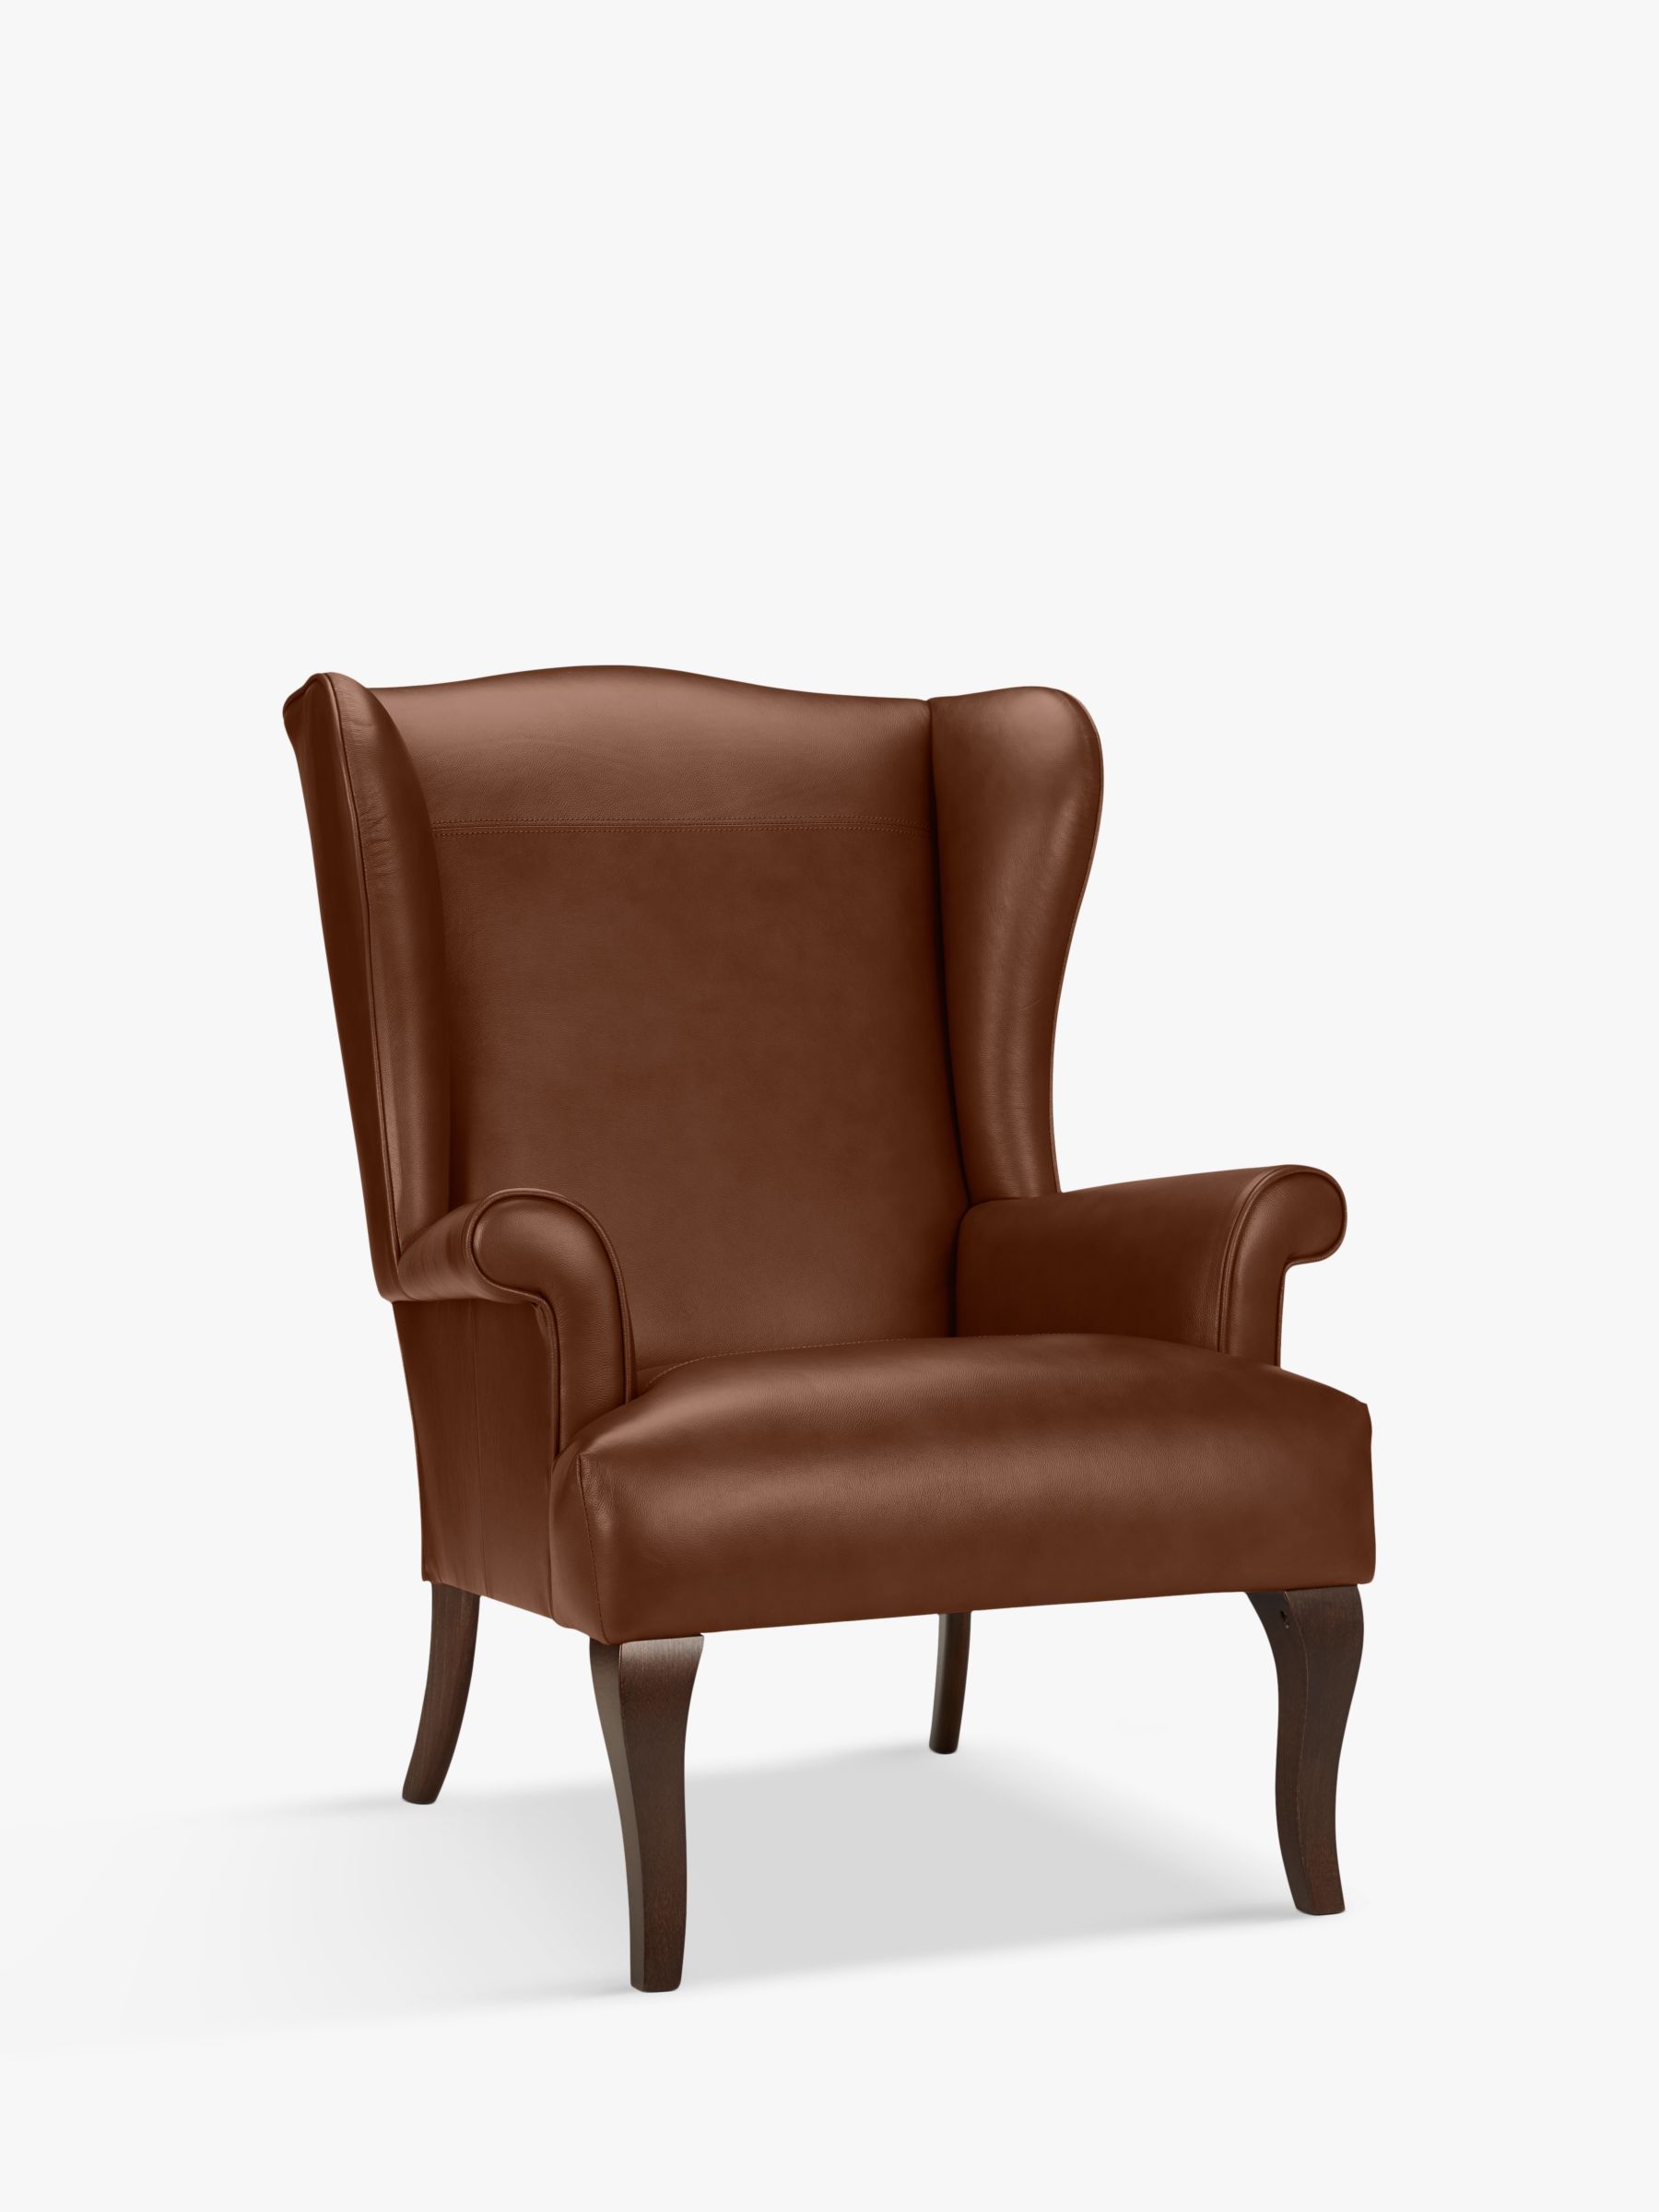 Shaftesbury Leather Wing Chair, Brown Leather Wing Chair